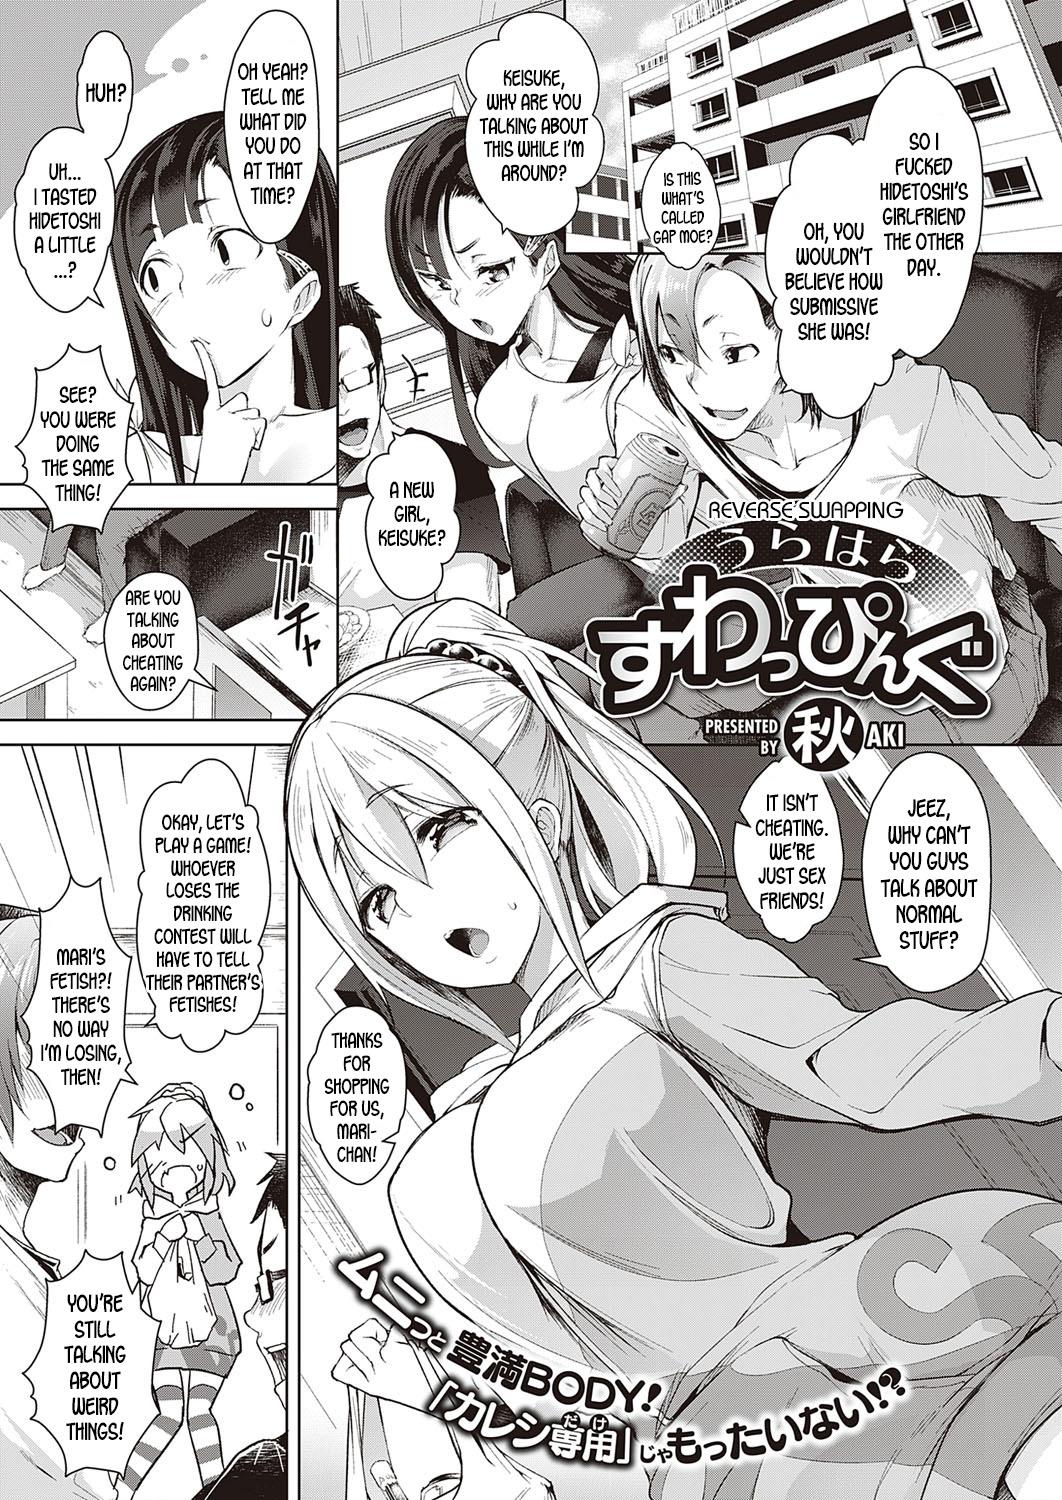 Rabuda Urahara Swapping | Reverse Swapping Analsex - Page 1